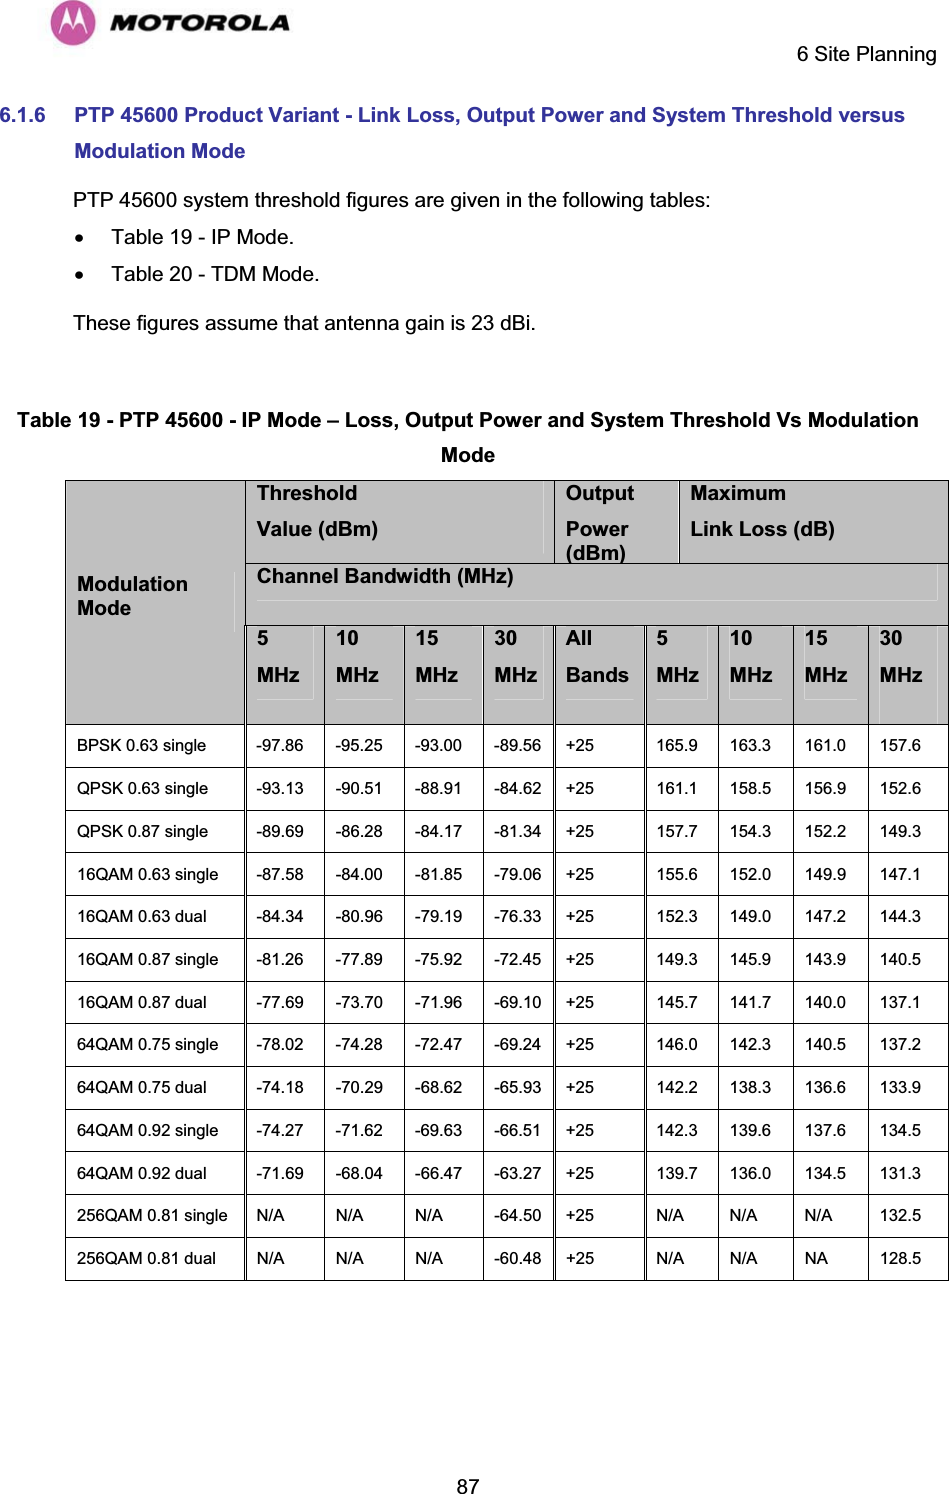     6 Site Planning  876.1.6 PTP 45600 Product Variant - Link Loss, Output Power and System Threshold versus Modulation Mode PTP 45600 system threshold figures are given in the following tables: x  Table 19 - IP Mode. x  Table 20 - TDM Mode. These figures assume that antenna gain is 23 dBi.  Table 19 - PTP 45600 - IP Mode – Loss, Output Power and System Threshold Vs Modulation ModeThreshold Value (dBm) Output Power (dBm)MaximumLink Loss (dB) Channel Bandwidth (MHz) ModulationMode5MHz10MHz15MHz30MHzAllBands 5MHz10MHz15MHz30MHzBPSK 0.63 single  -97.86   -95.25   -93.00   -89.56  +25  165.9   163.3   161.0   157.6  QPSK 0.63 single  -93.13   -90.51   -88.91   -84.62  +25  161.1   158.5   156.9   152.6  QPSK 0.87 single  -89.69   -86.28   -84.17   -81.34  +25  157.7   154.3   152.2   149.3  16QAM 0.63 single  -87.58   -84.00   -81.85   -79.06  +25  155.6   152.0   149.9   147.1  16QAM 0.63 dual  -84.34   -80.96   -79.19   -76.33  +25  152.3   149.0   147.2   144.3  16QAM 0.87 single  -81.26   -77.89   -75.92   -72.45  +25  149.3   145.9   143.9   140.5  16QAM 0.87 dual  -77.69   -73.70   -71.96   -69.10  +25  145.7   141.7   140.0   137.1  64QAM 0.75 single  -78.02   -74.28   -72.47   -69.24  +25  146.0   142.3   140.5   137.2  64QAM 0.75 dual  -74.18   -70.29   -68.62   -65.93  +25  142.2   138.3   136.6   133.9  64QAM 0.92 single  -74.27   -71.62   -69.63   -66.51  +25  142.3   139.6   137.6   134.5  64QAM 0.92 dual  -71.69   -68.04   -66.47   -63.27  +25  139.7   136.0   134.5   131.3  256QAM 0.81 single  N/A   N/A   N/A   -64.50  +25  N/A   N/A   N/A   132.5  256QAM 0.81 dual  N/A   N/A   N/A   -60.48  +25  N/A   N/A   NA   128.5   